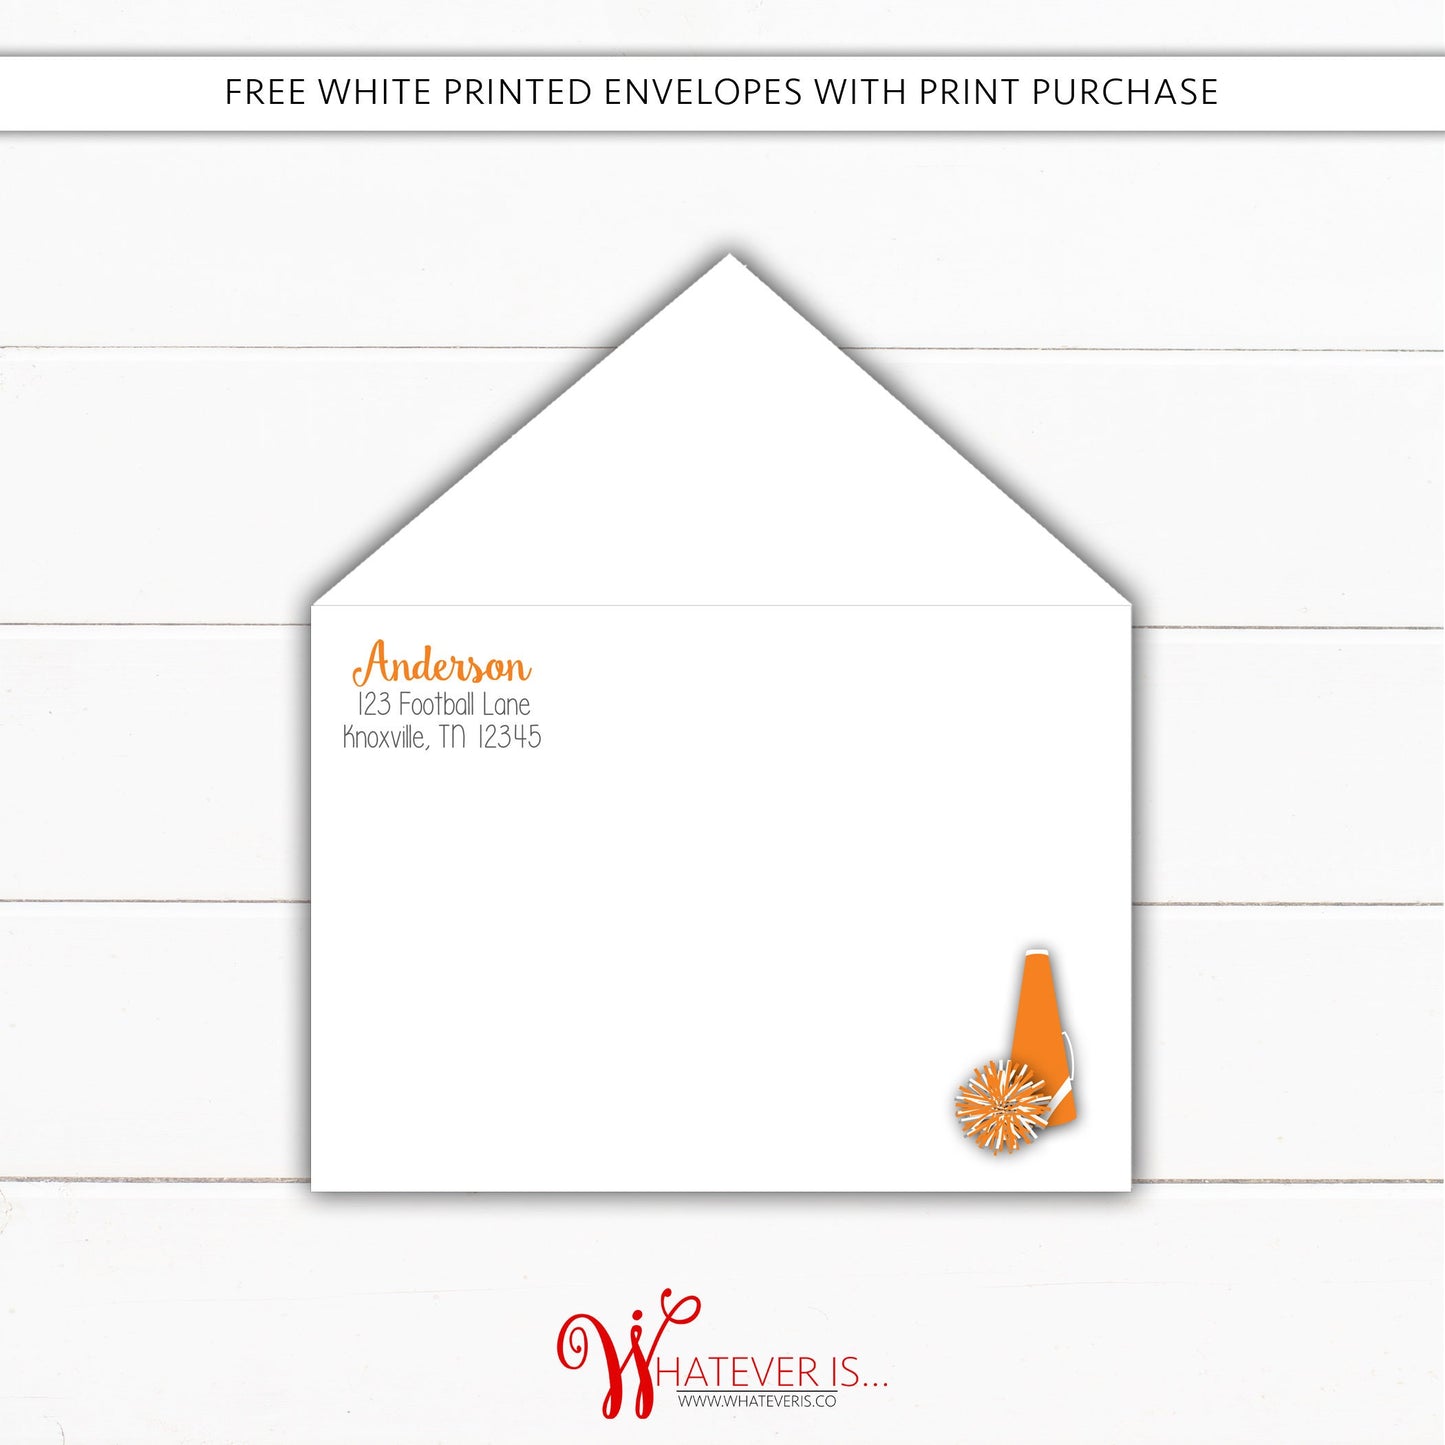 Orange and White Cheerleading Baby Shower Thank You Cards